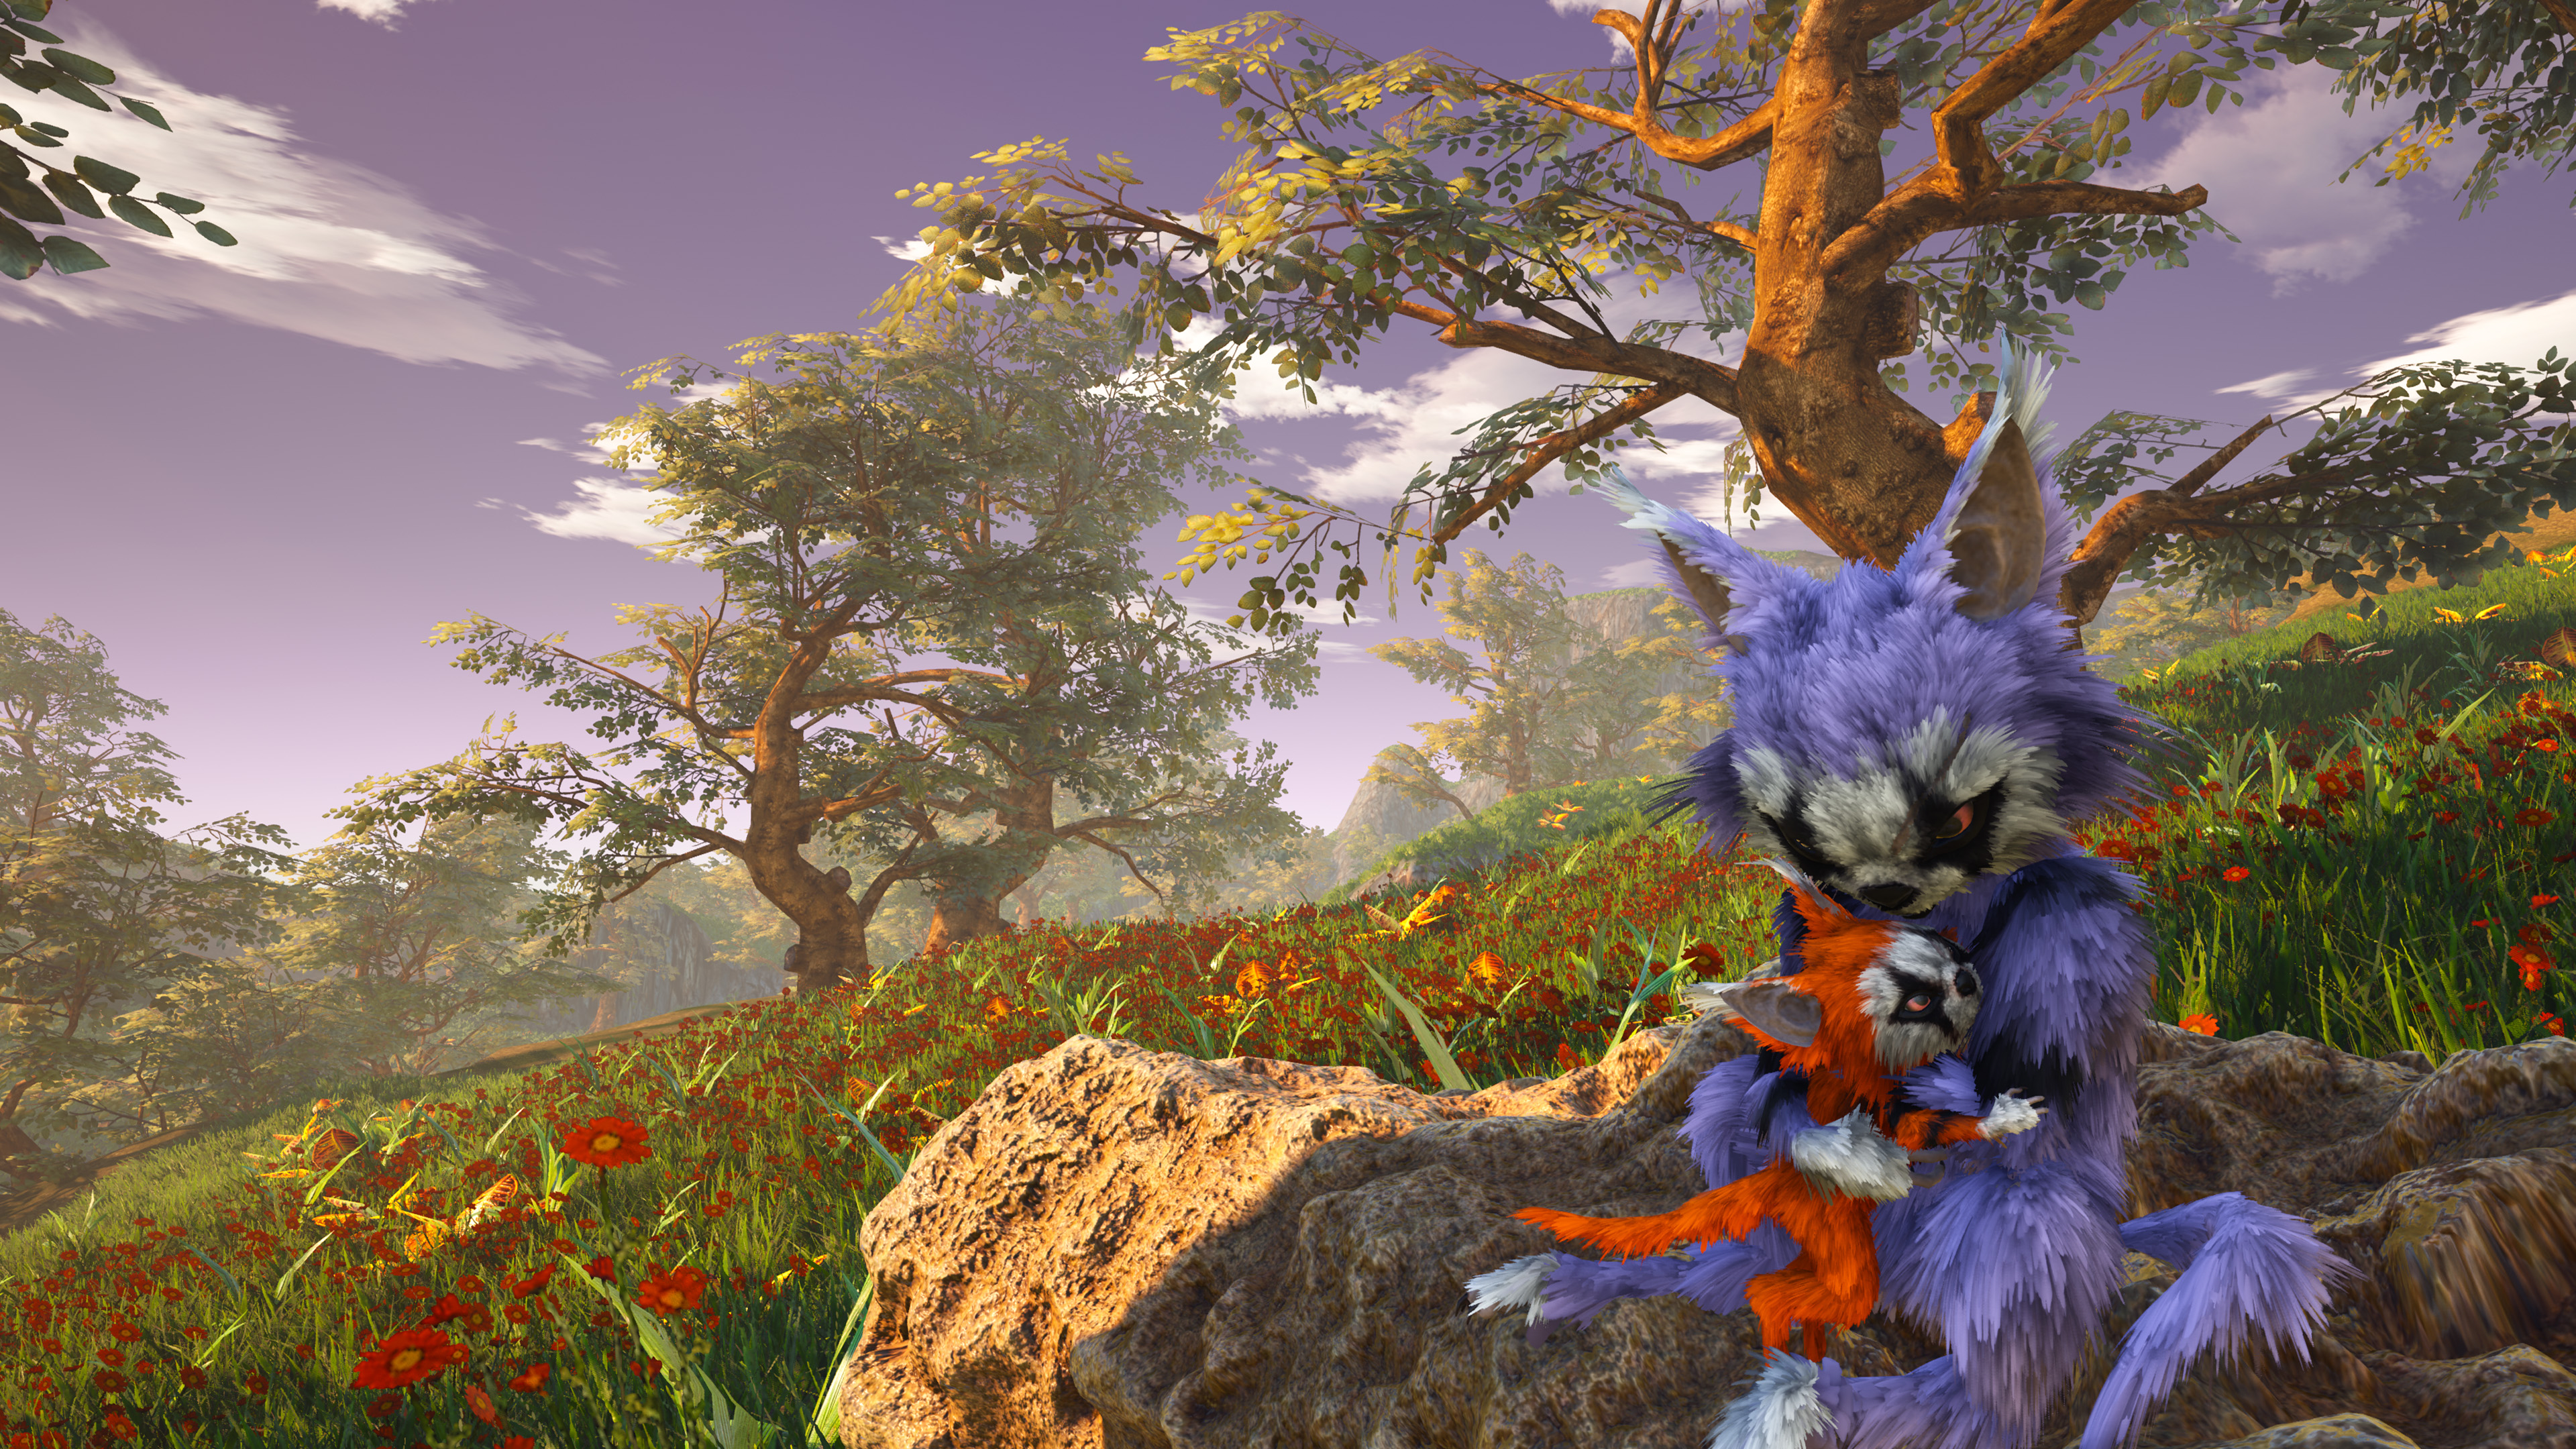 Media asset in full size related to 3dfxzone.it news item entitled as follows: THQ Nordic pubblica nuovi screenshots del game action RPG Biomutant | Image Name: news27453_Biomutant-Screenshot_3.jpg